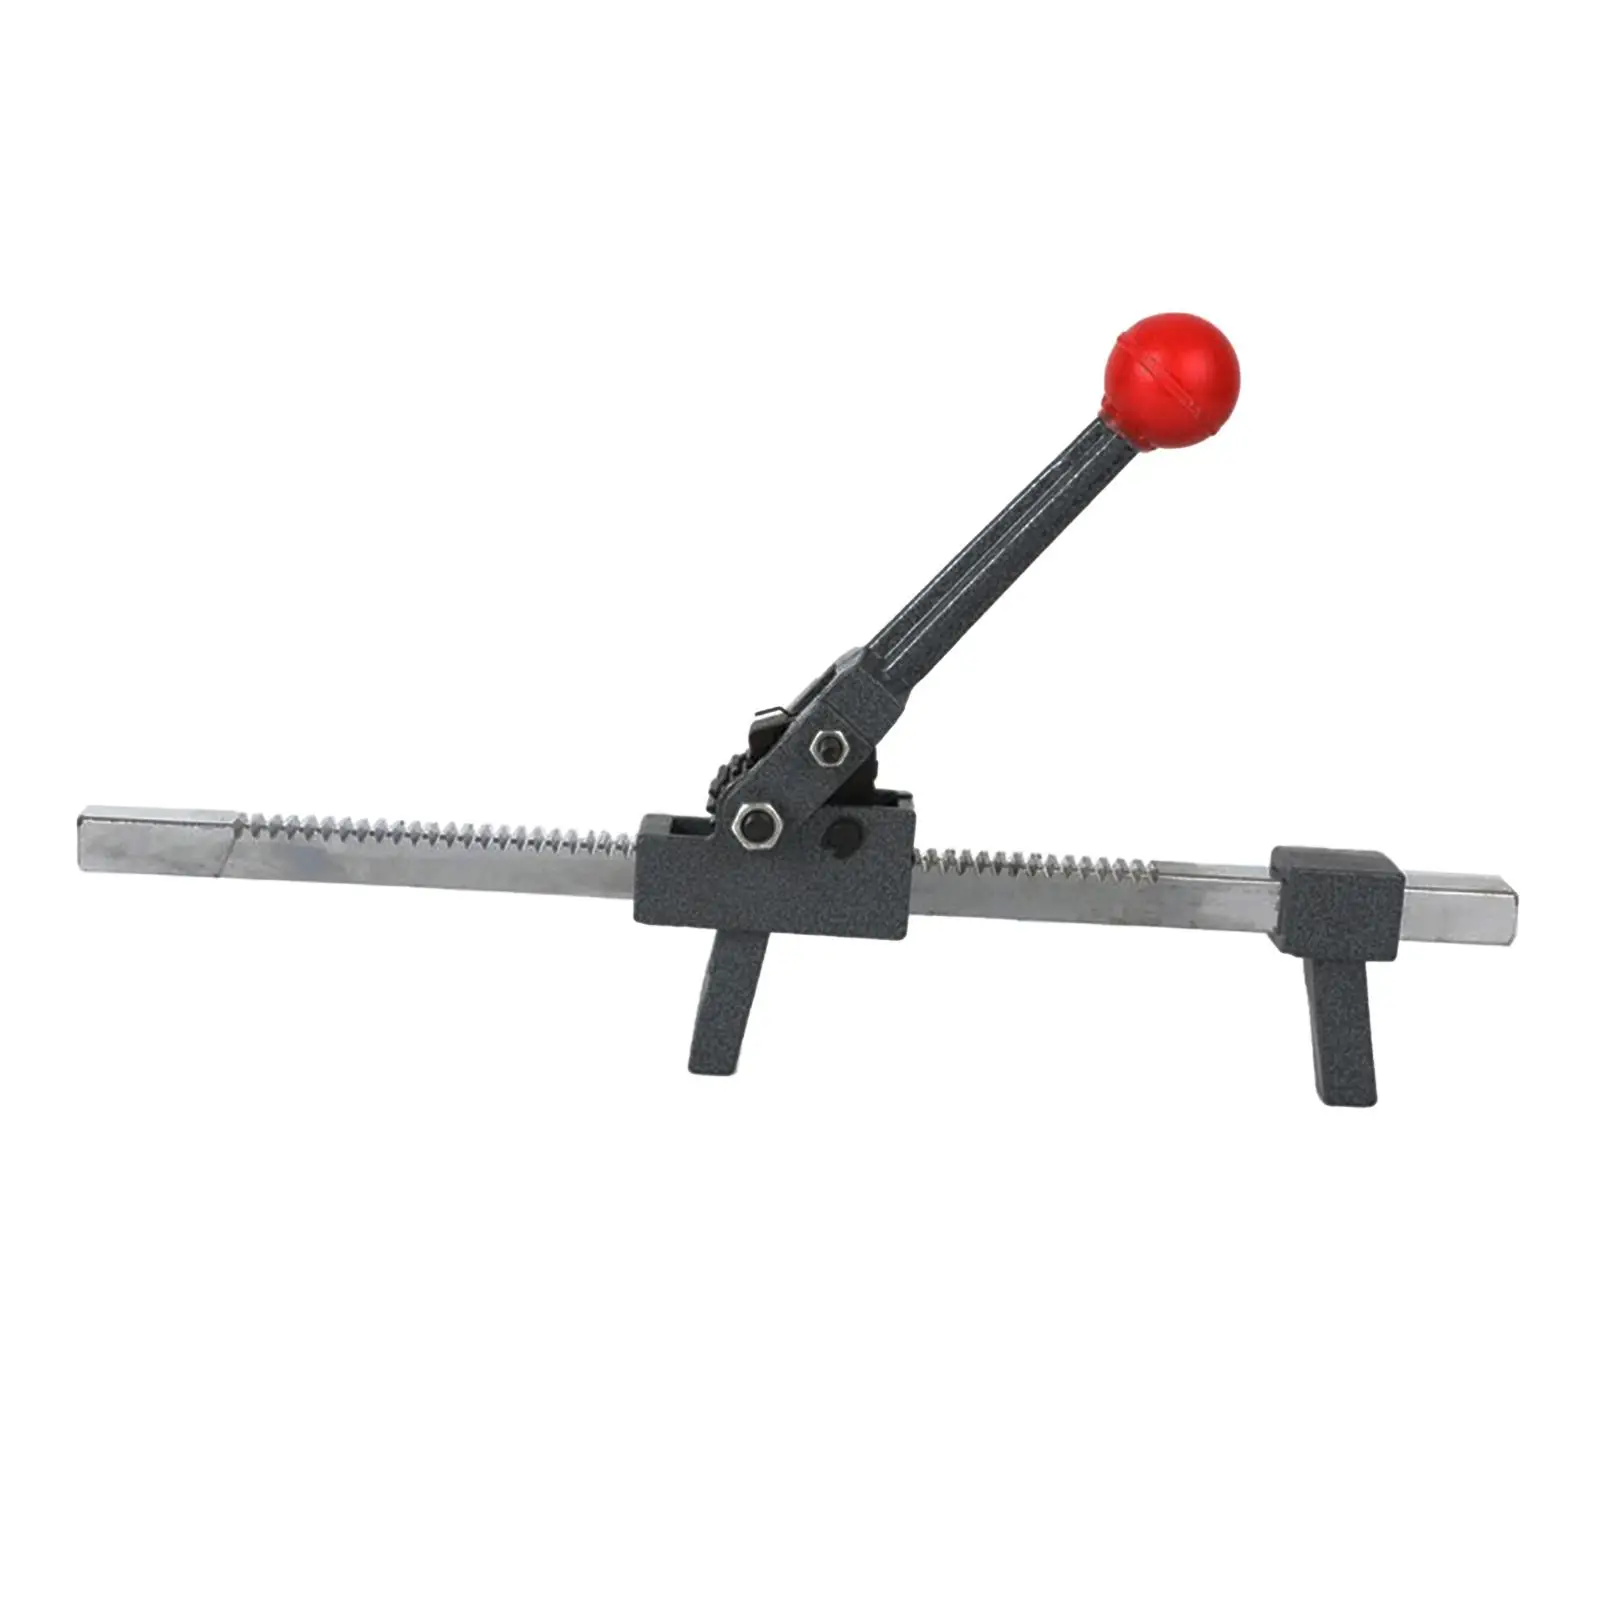 Manual Tire Changer Premium Vacuum Tire Changer Tool Replaces Mounting Tool